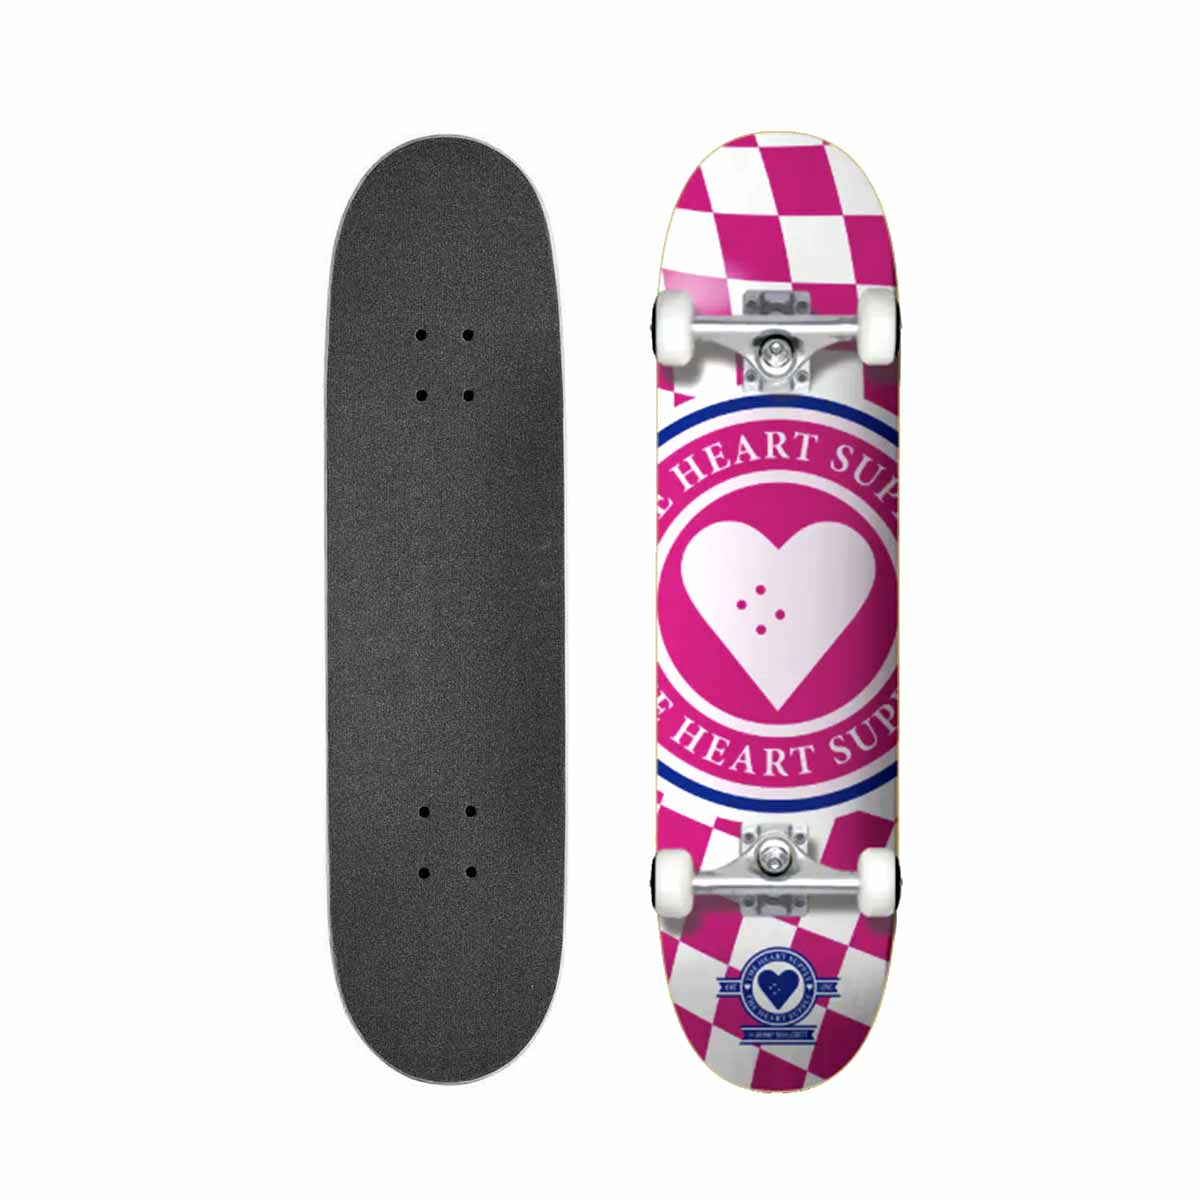 Heart Supply Supply Insignia Check Pink Complete Skateboard – 7.75